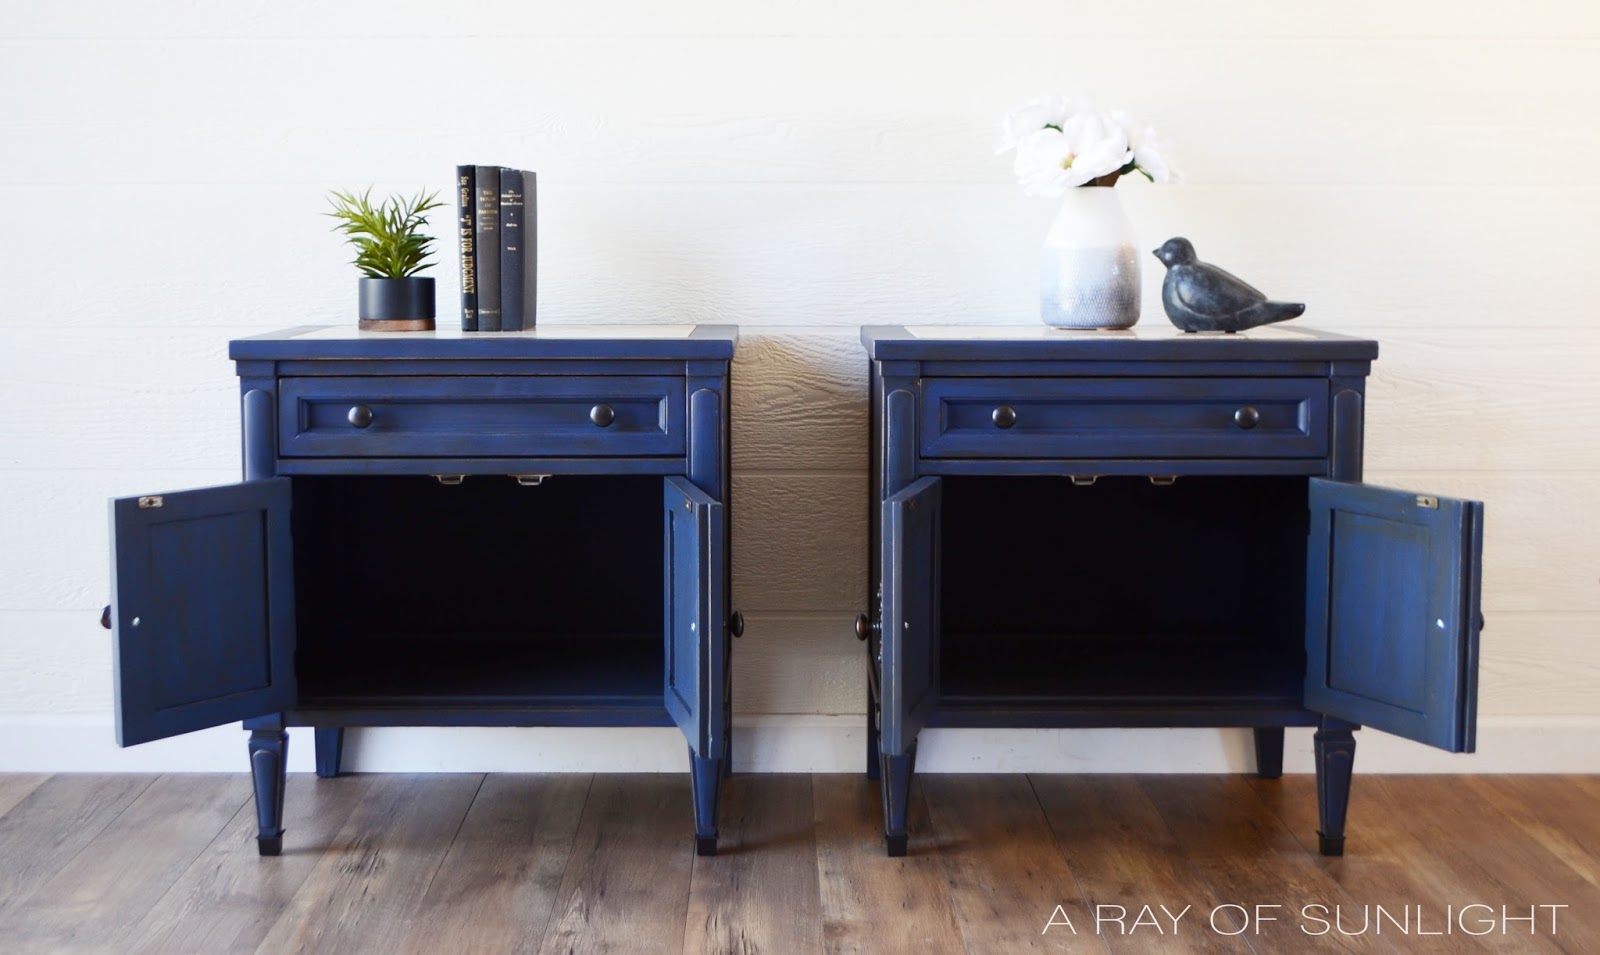 After photo of blue nightstands with cabinet doors opened